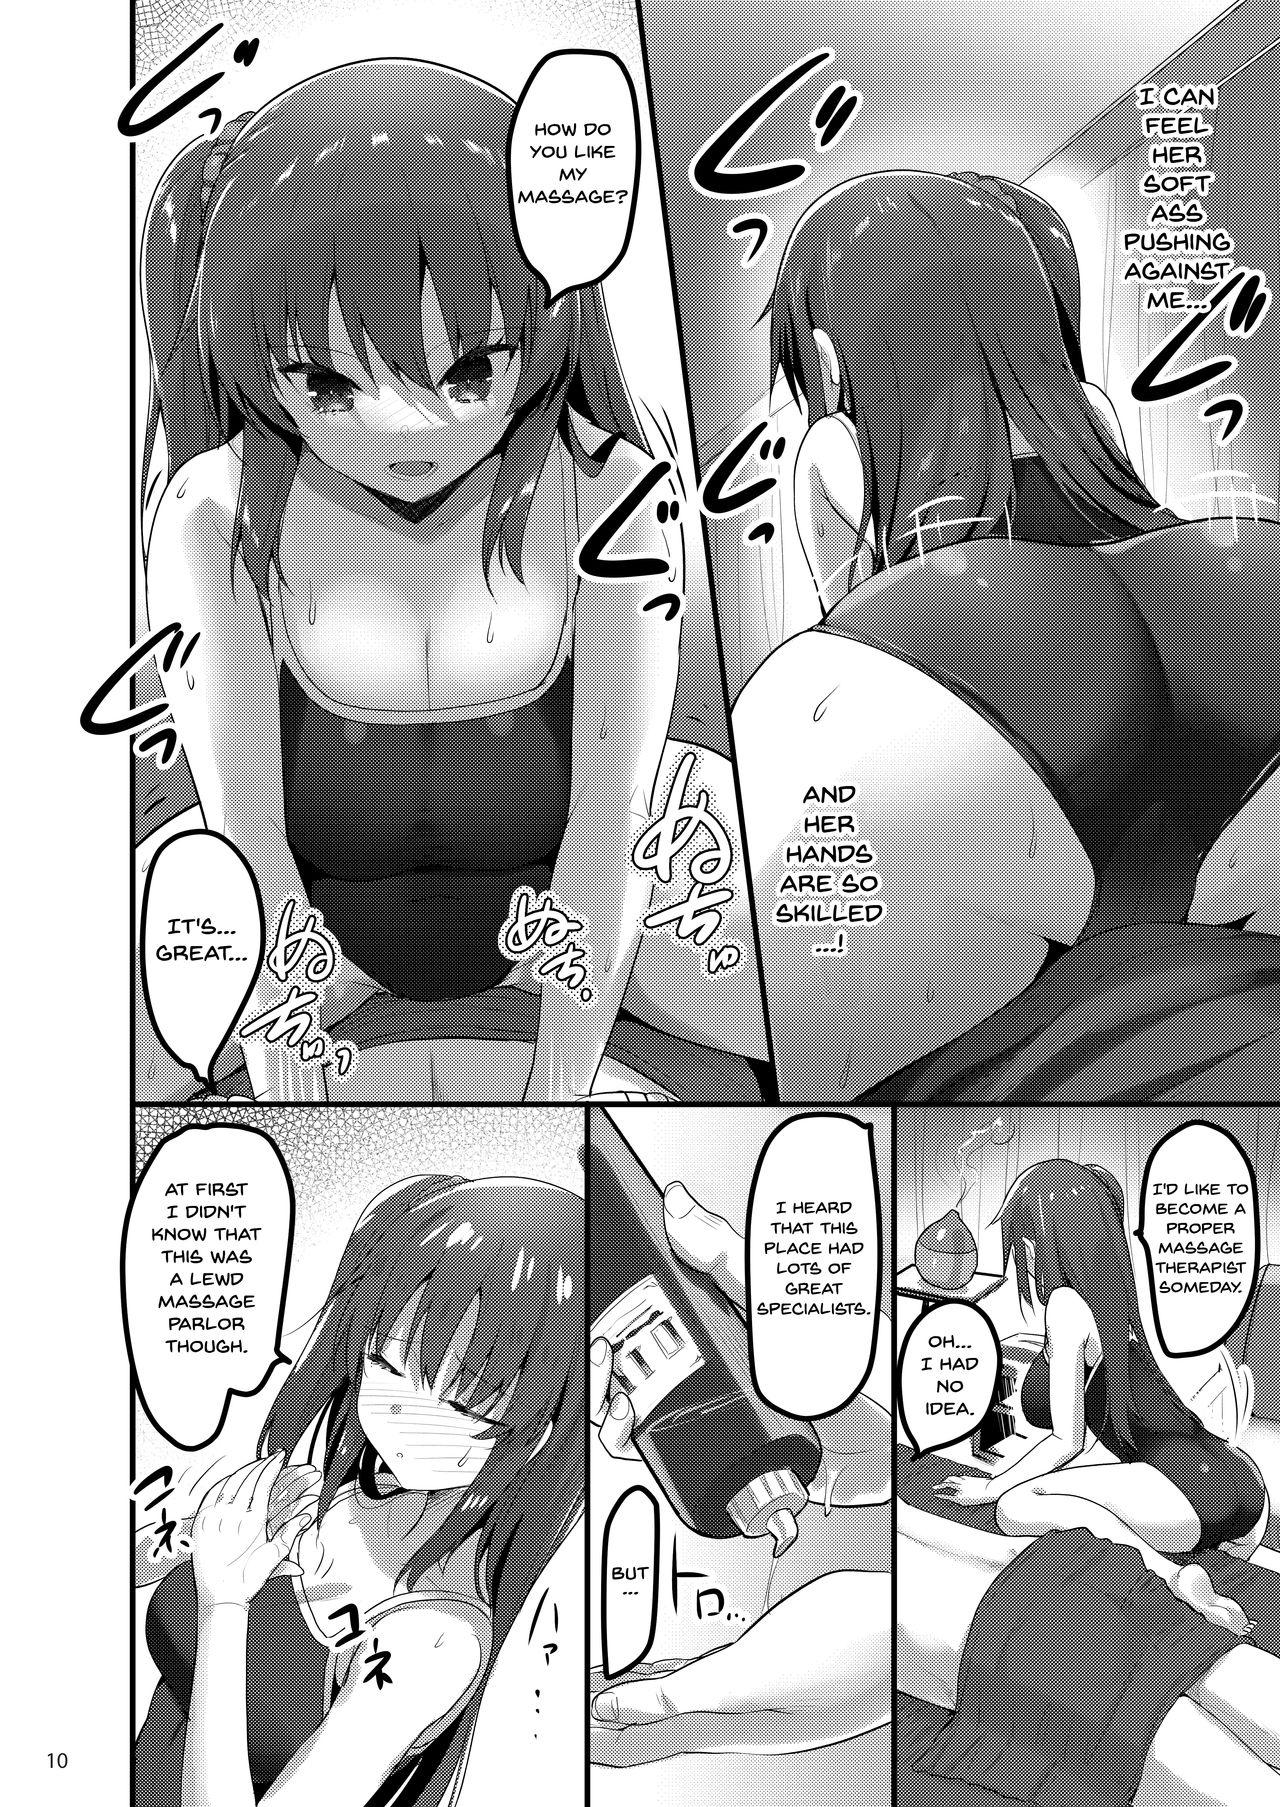 Leather Ecchi na Massage-ya ni Kitara Classmate ga Dete Kita Hanashi | A Story Of Going Out To Get a Massage And The One Who Shows Up Is My Classmate - Original Teensex - Page 9